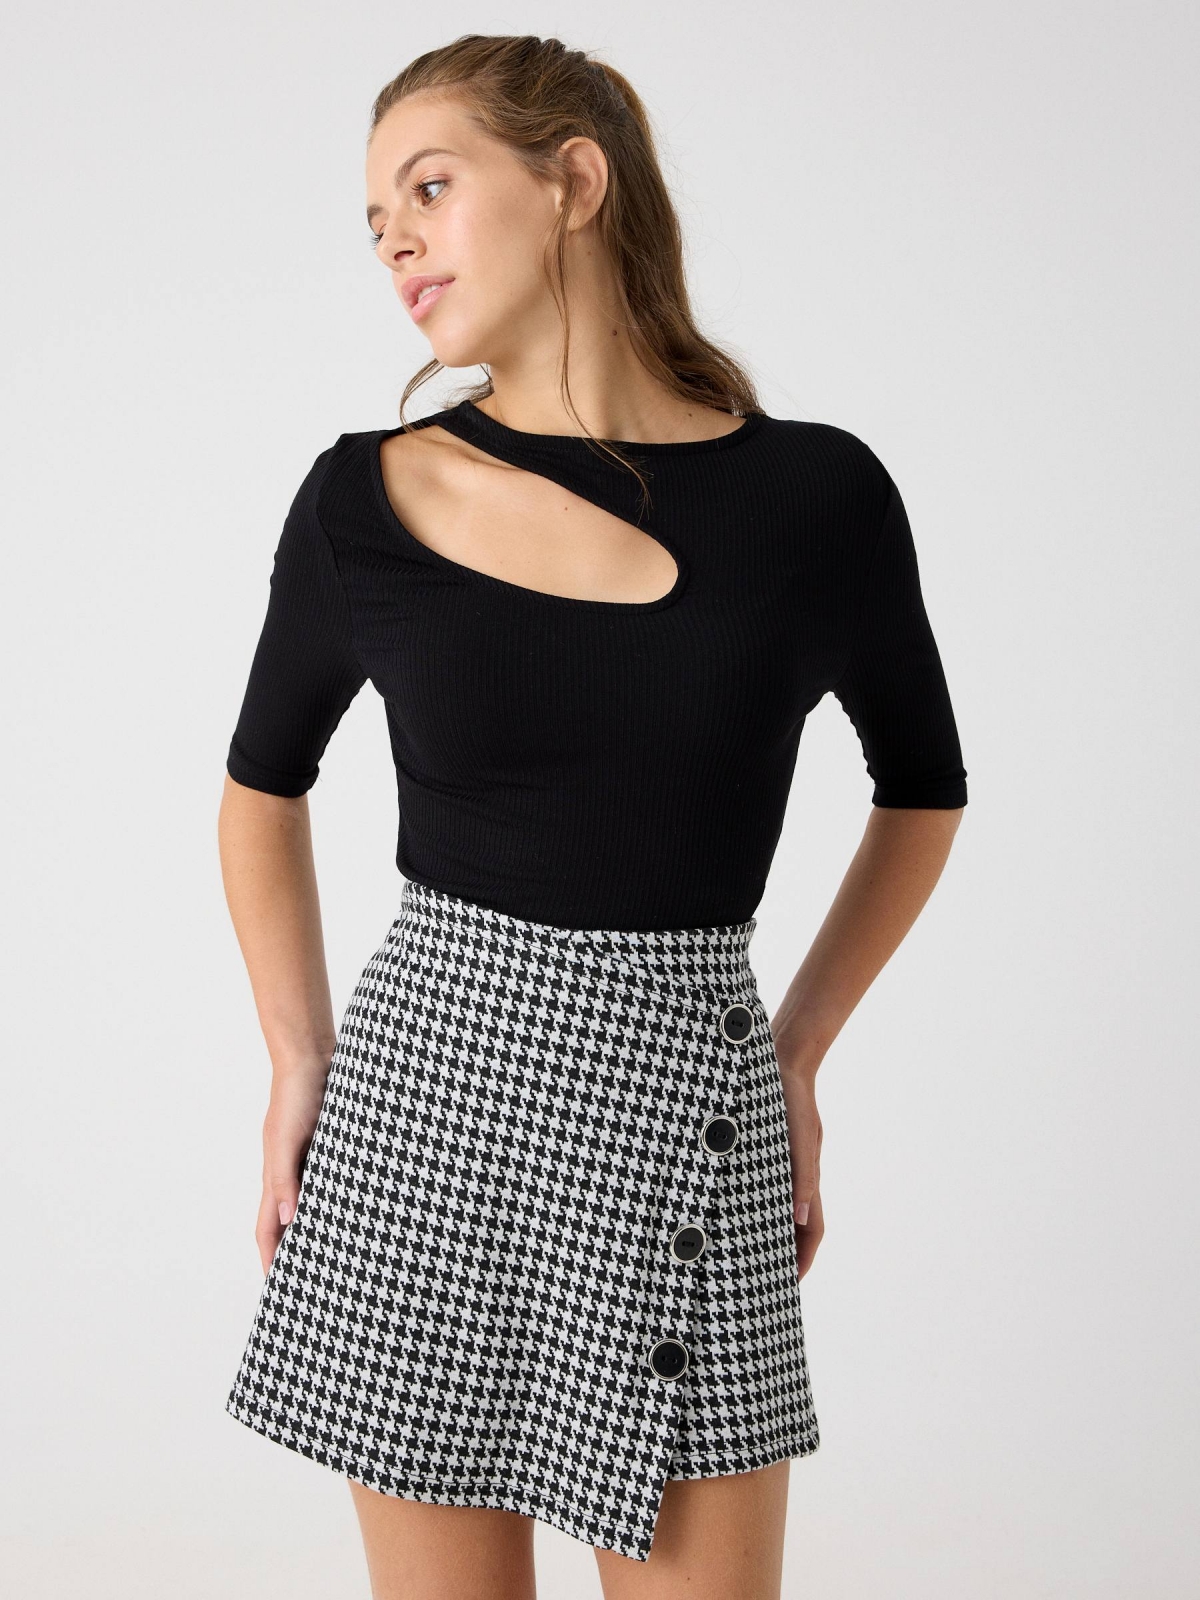 Jacquard vichy skort black middle front view